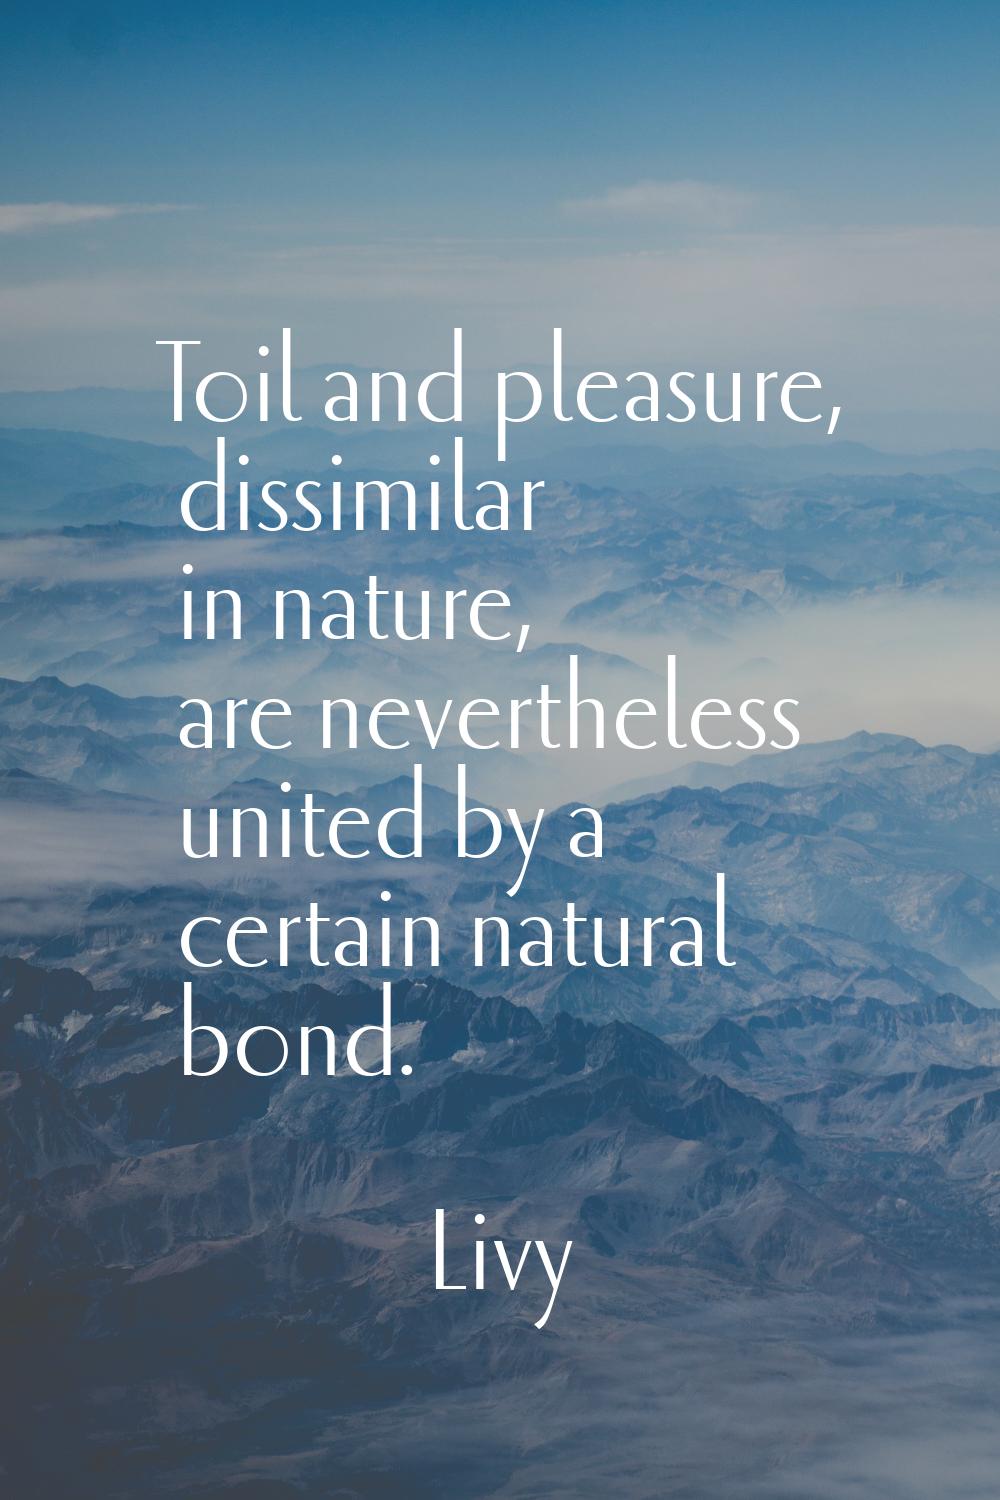 Toil and pleasure, dissimilar in nature, are nevertheless united by a certain natural bond.